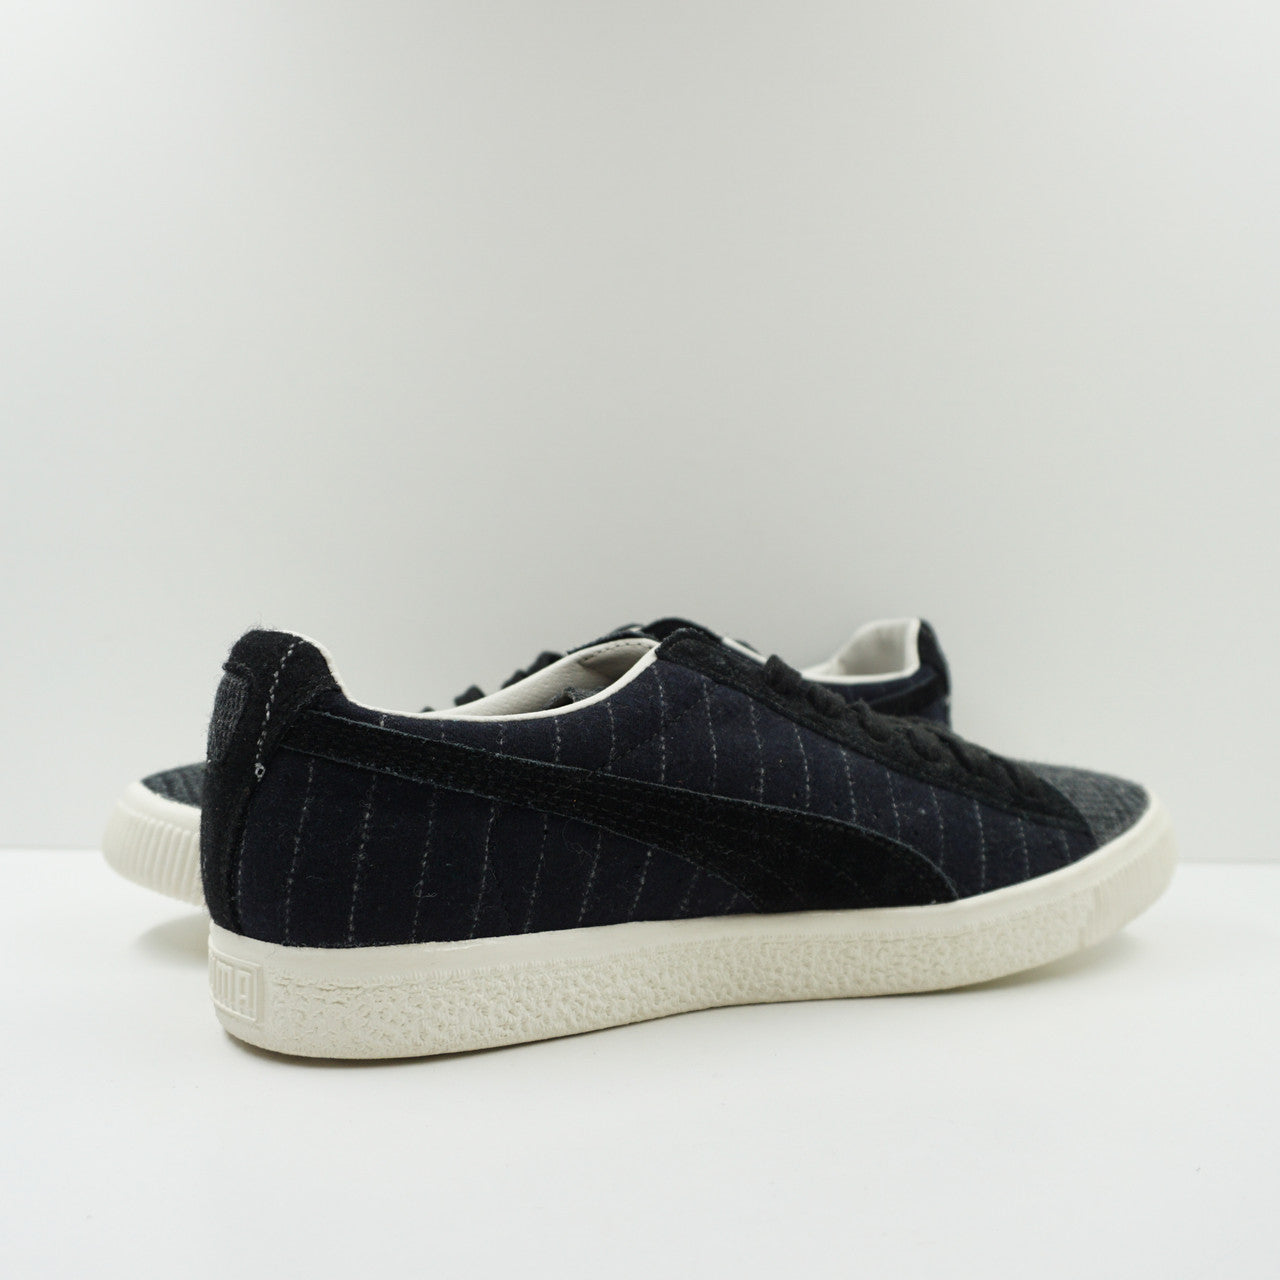 Puma Clyde for United Arrows & Sons